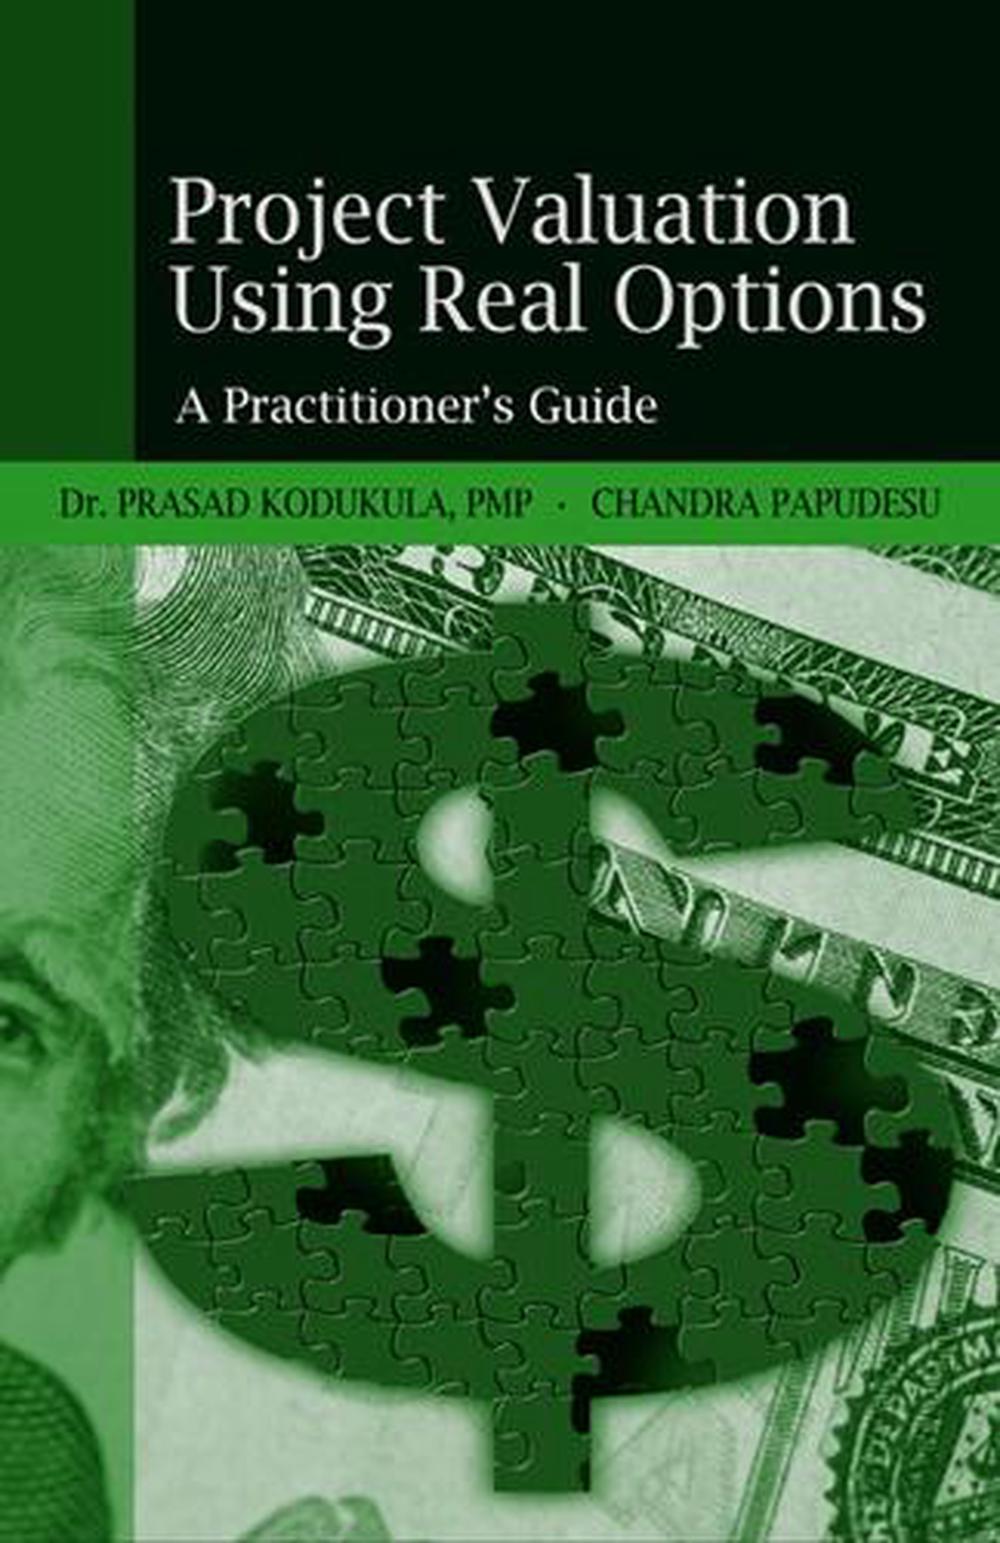 real options valuation